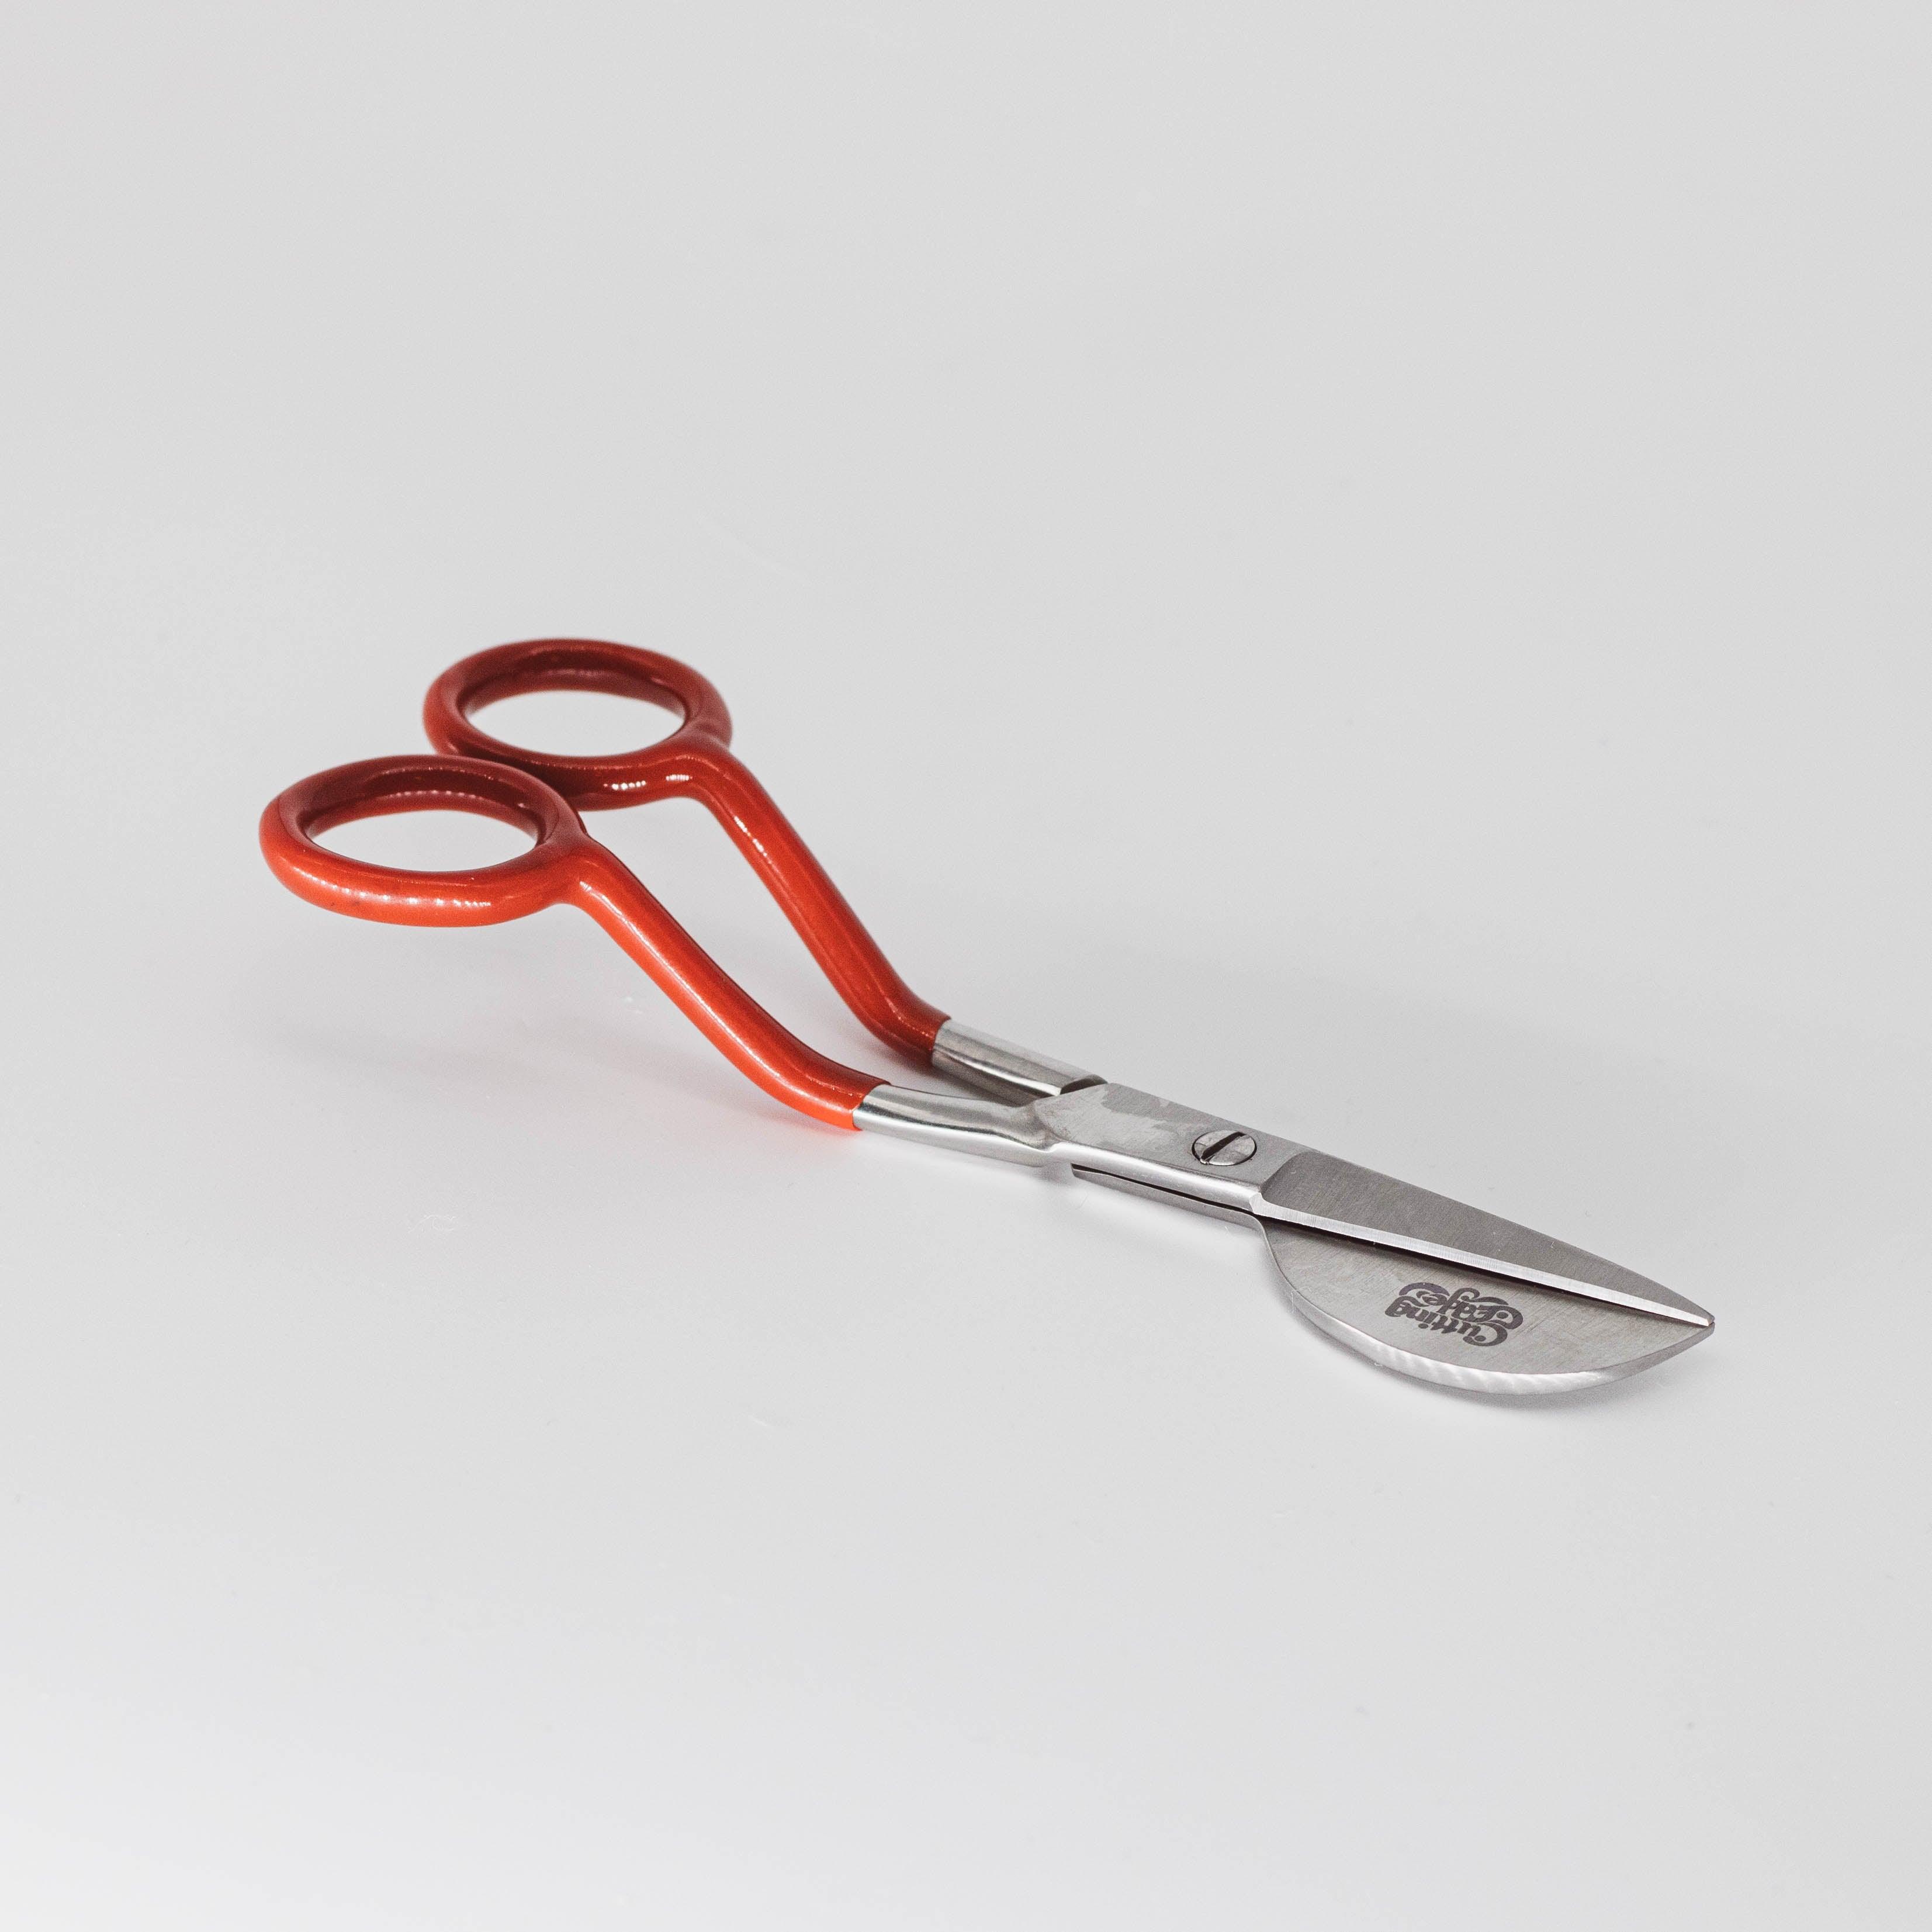 Duckbill scissors for cutting and trimming